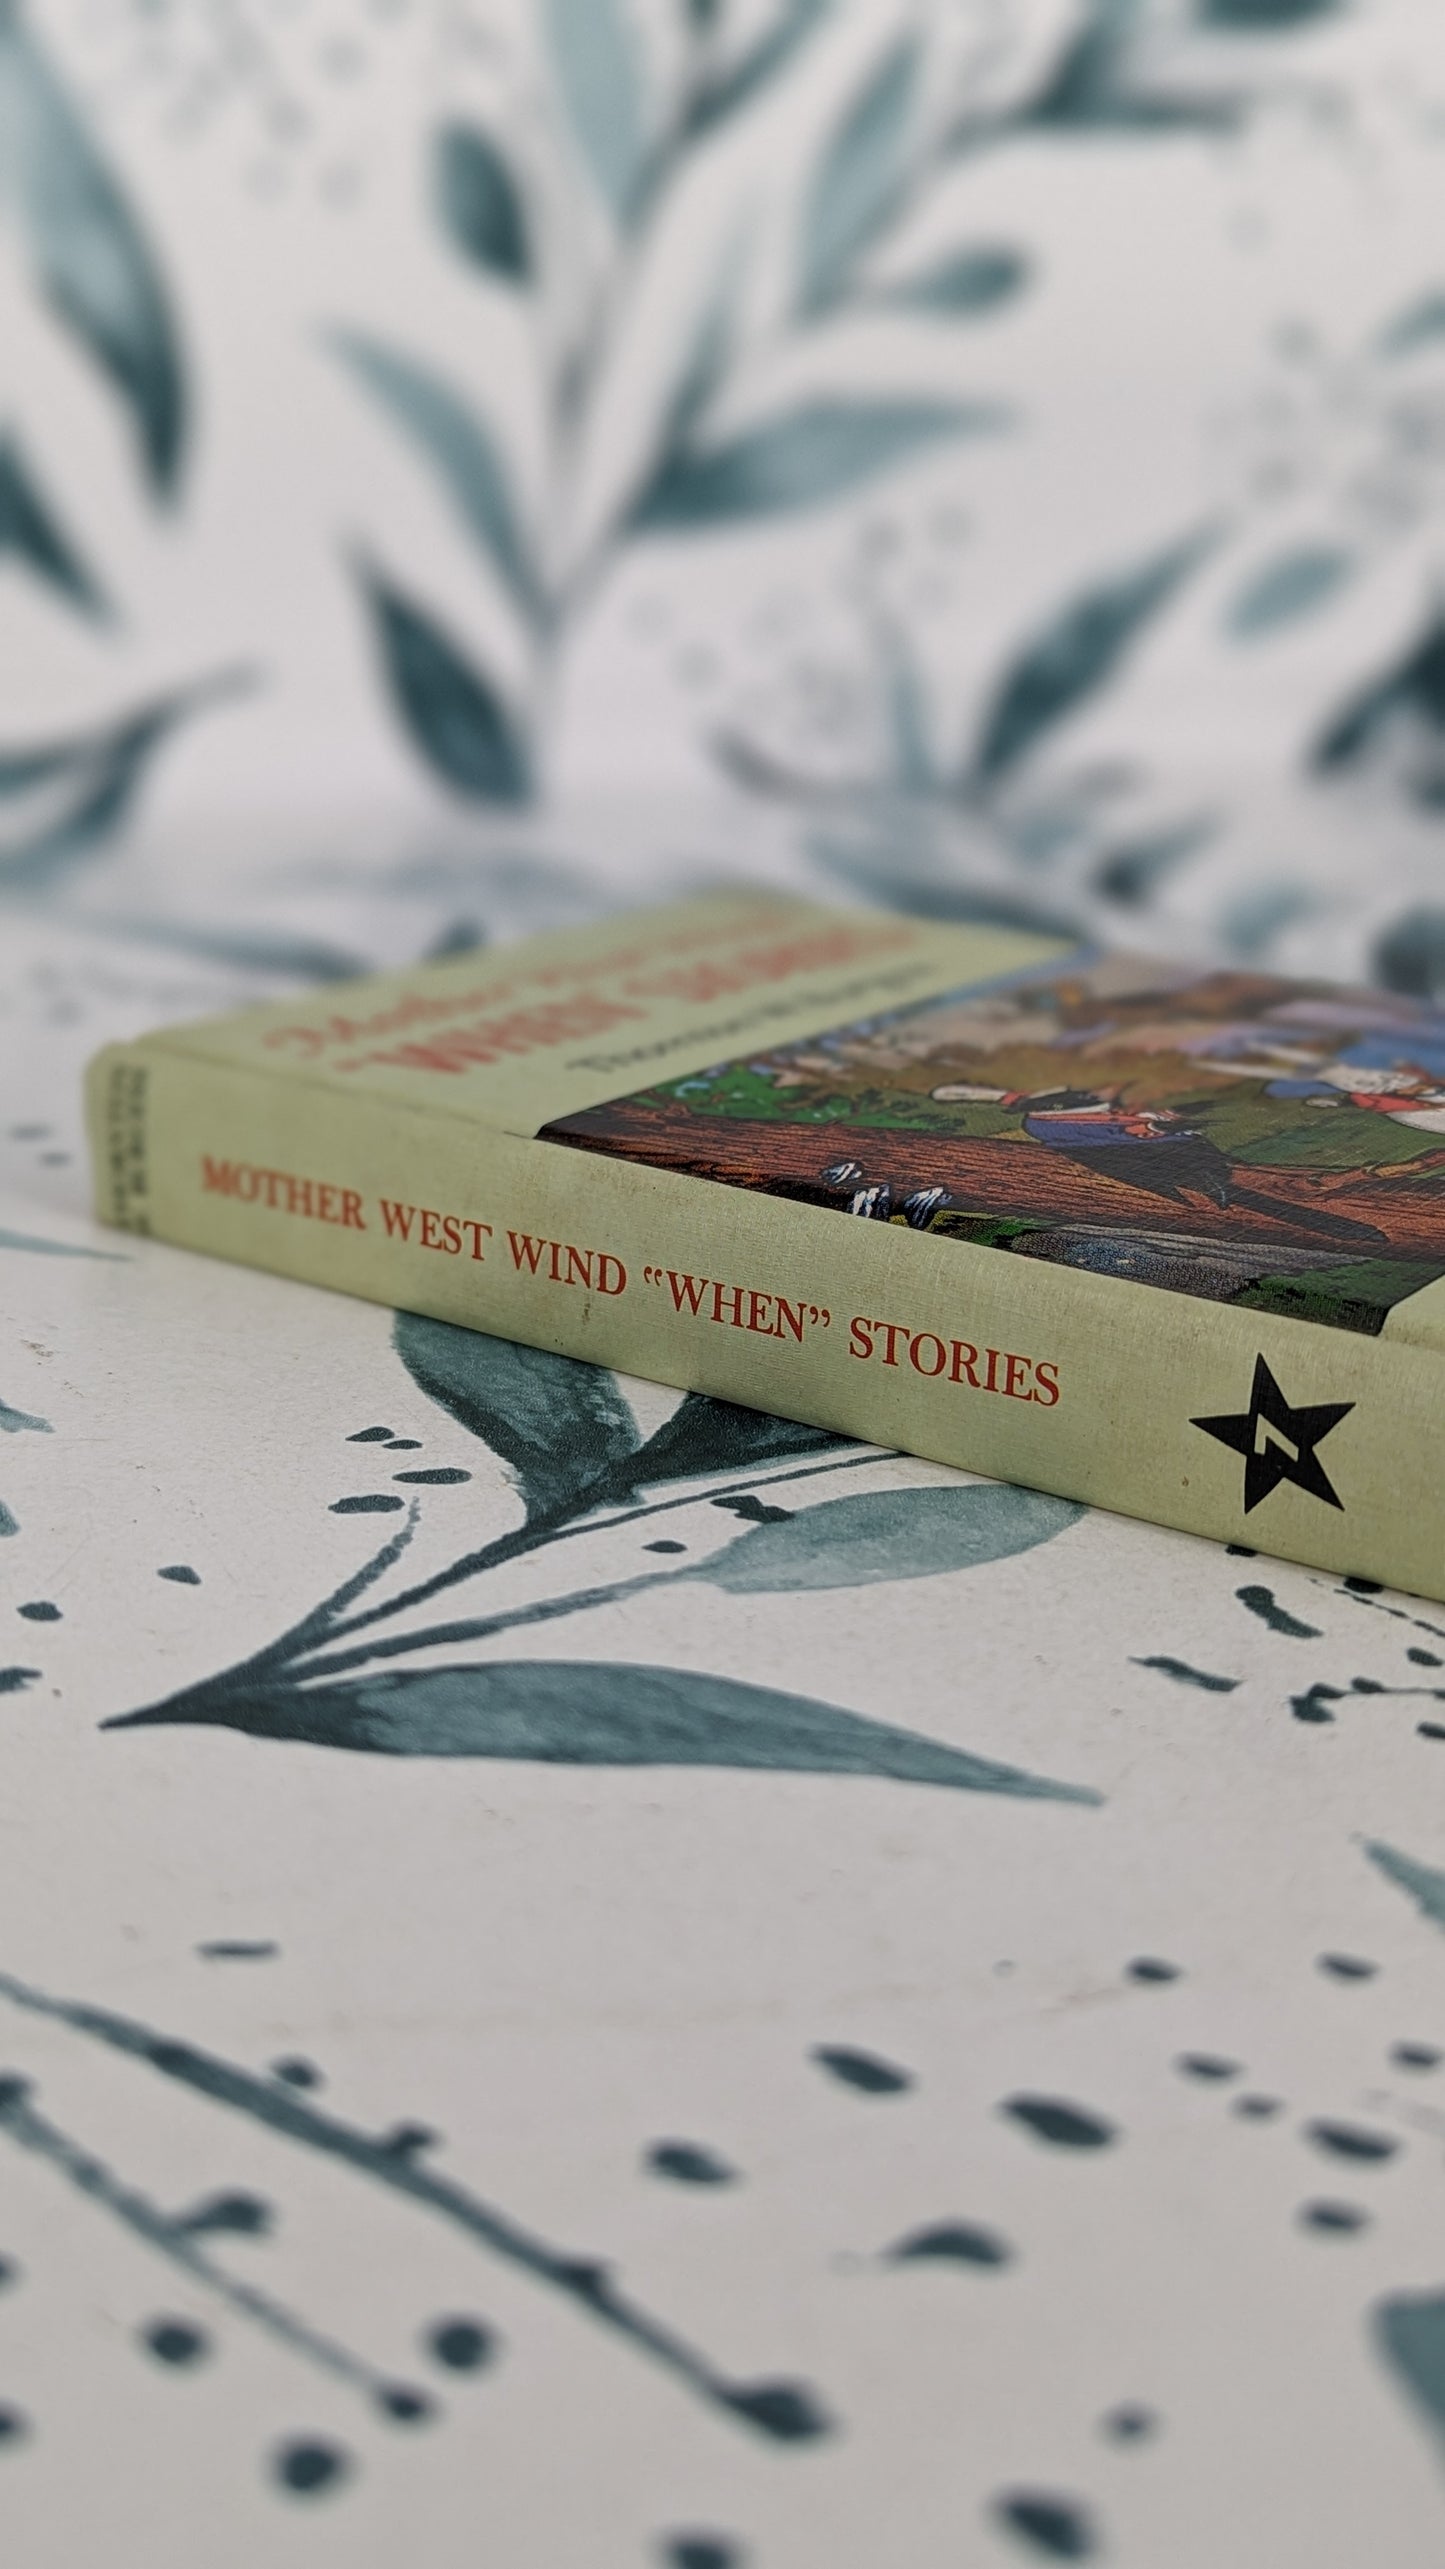 Mother West Wind: "WHEN" Stories